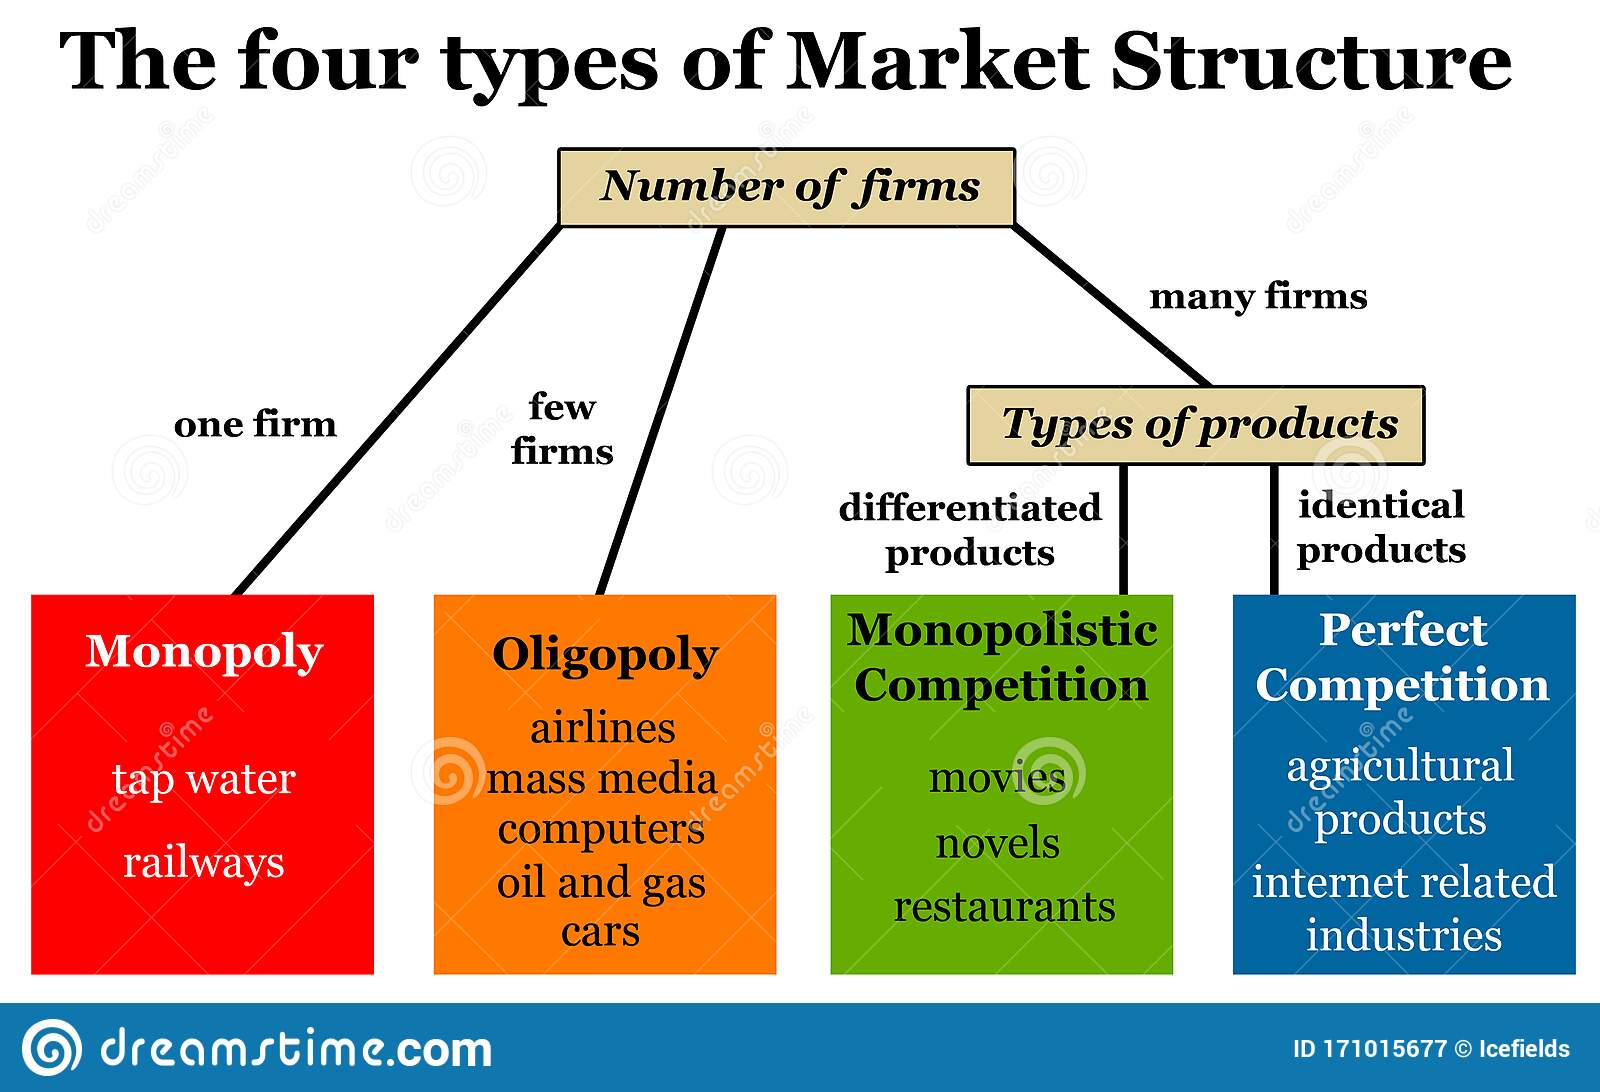 What Are The 4 Types Of Market Structures - Design Talk